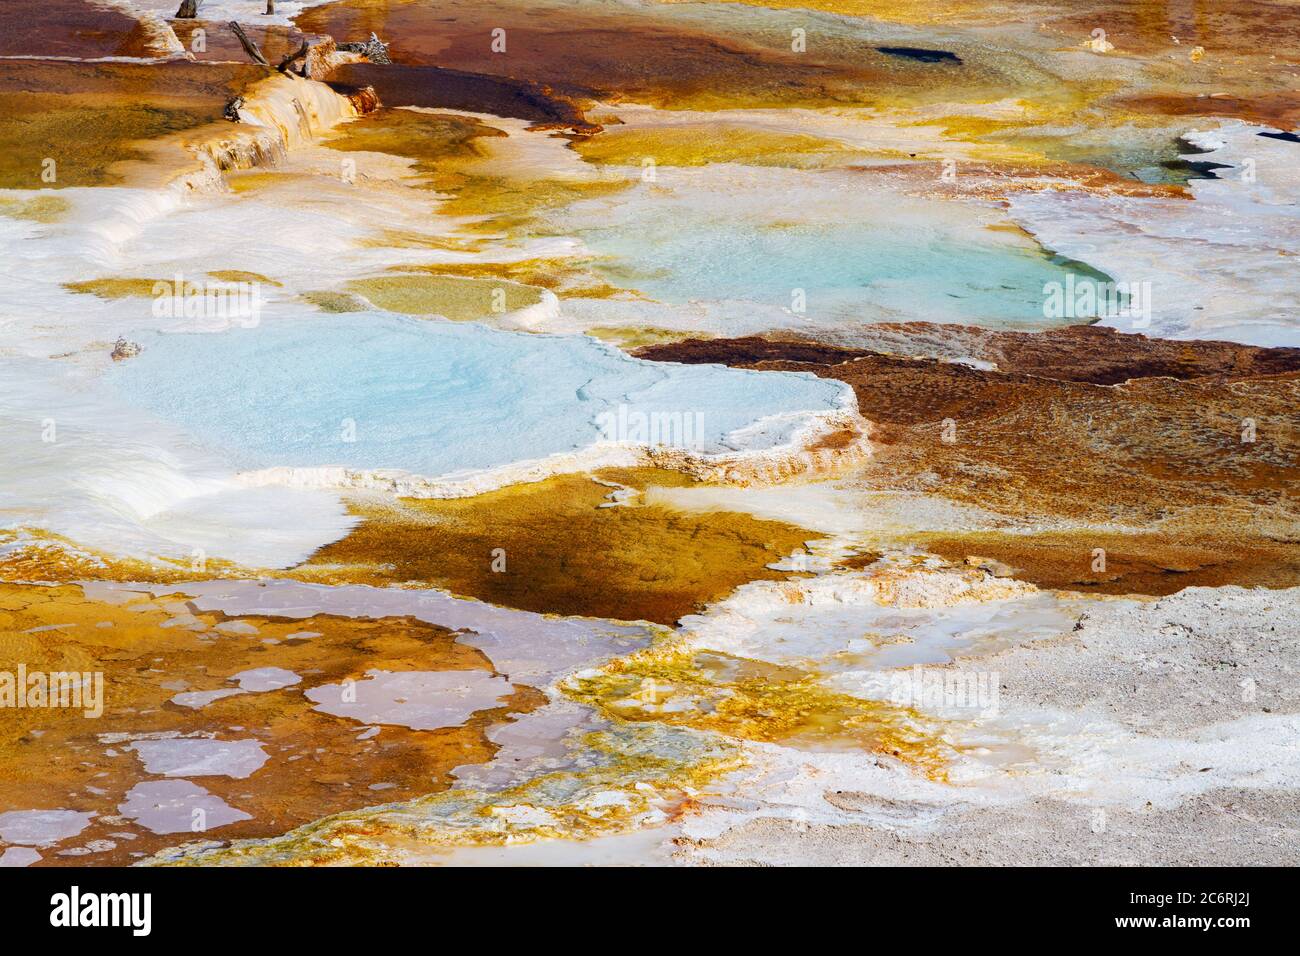 Close up of the hot springs and travertine formations at the Main Terrace of Mammoth Hot Springs in Yellowstone National Park, USA. Stock Photo